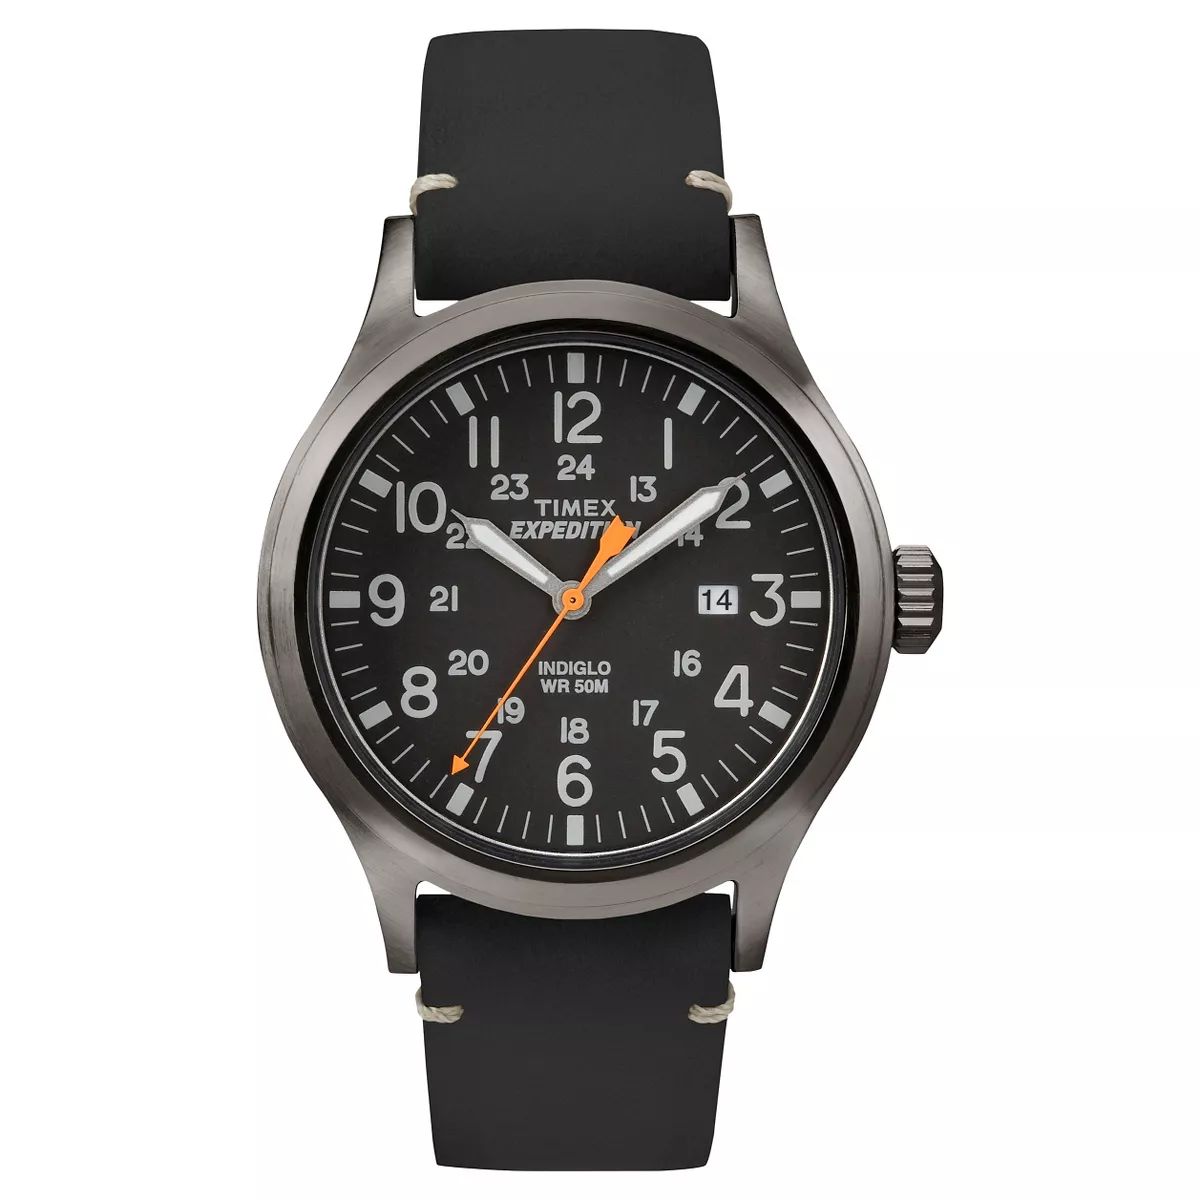 Men's Timex Expedition Scout Watch with Leather Strap - Gray/Black TW4B01900JT | Target